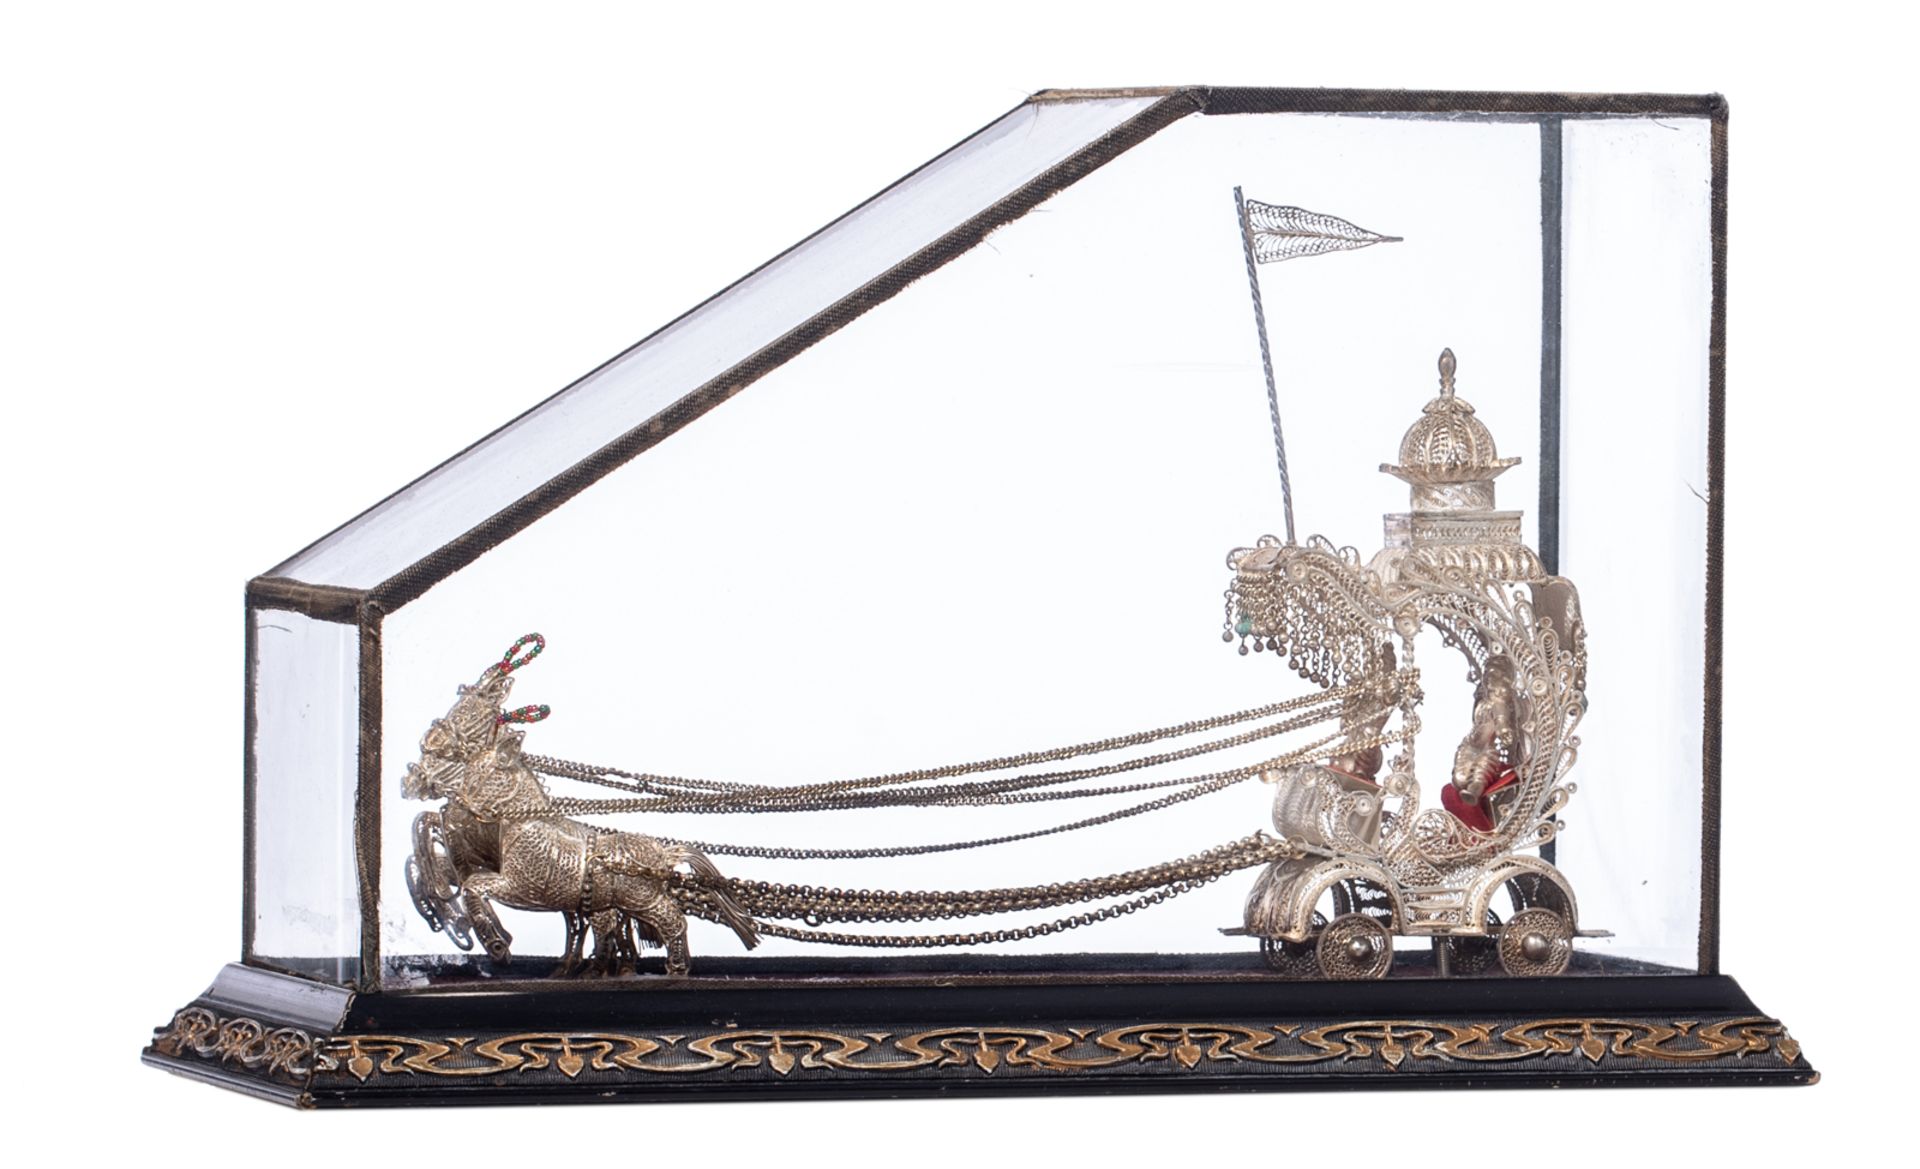 An Oriental silver filigree horse-drawn carriage, in a glass case with an Art Nouveau decorated base